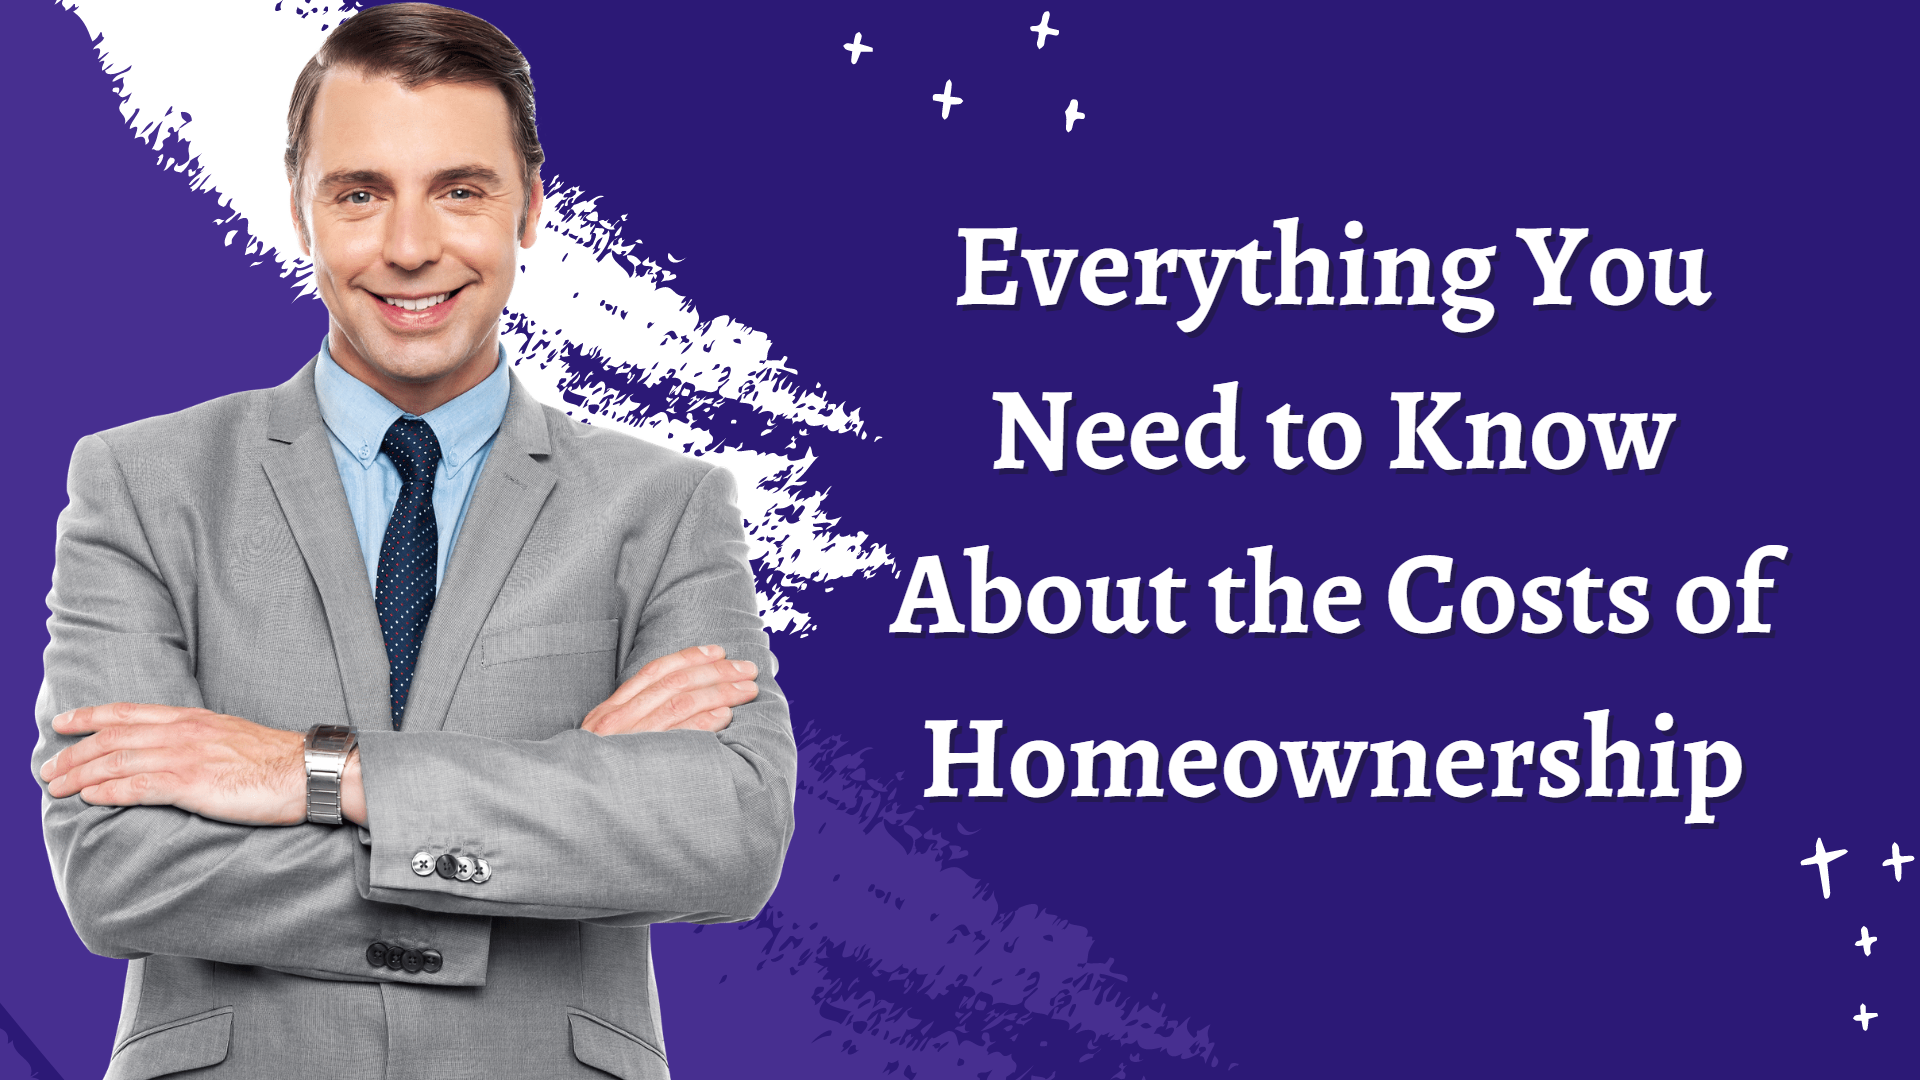 Everything You Need to Know About the Cost of Homeownership